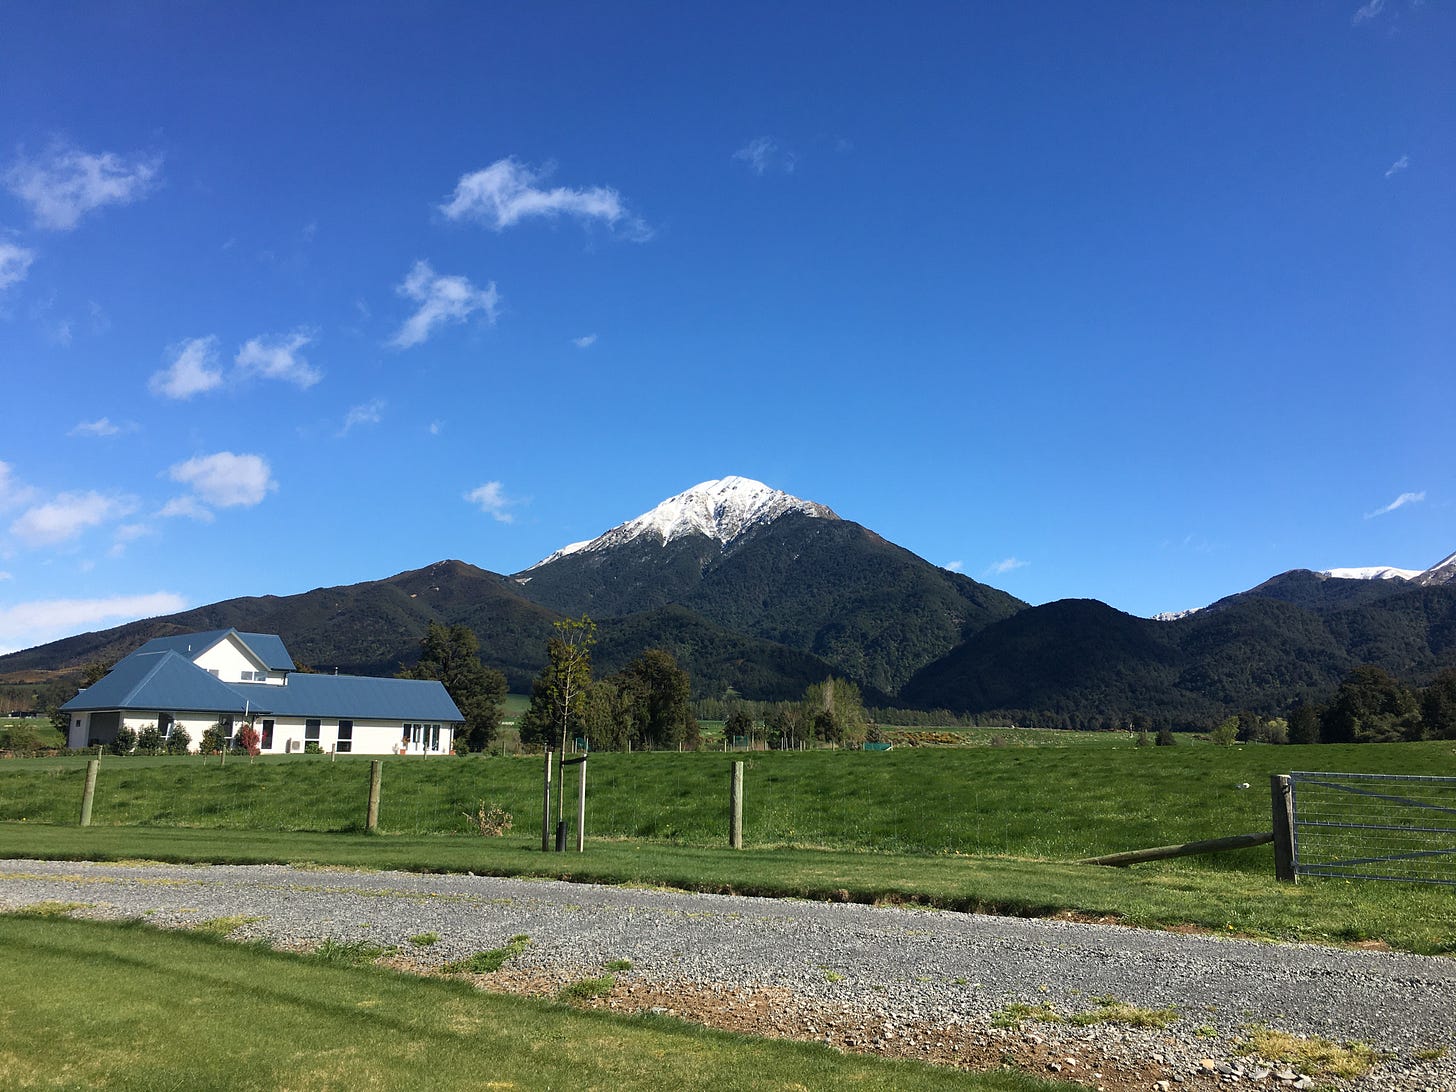 A photo of a snow-covered Mount Sommers in New Zealand.